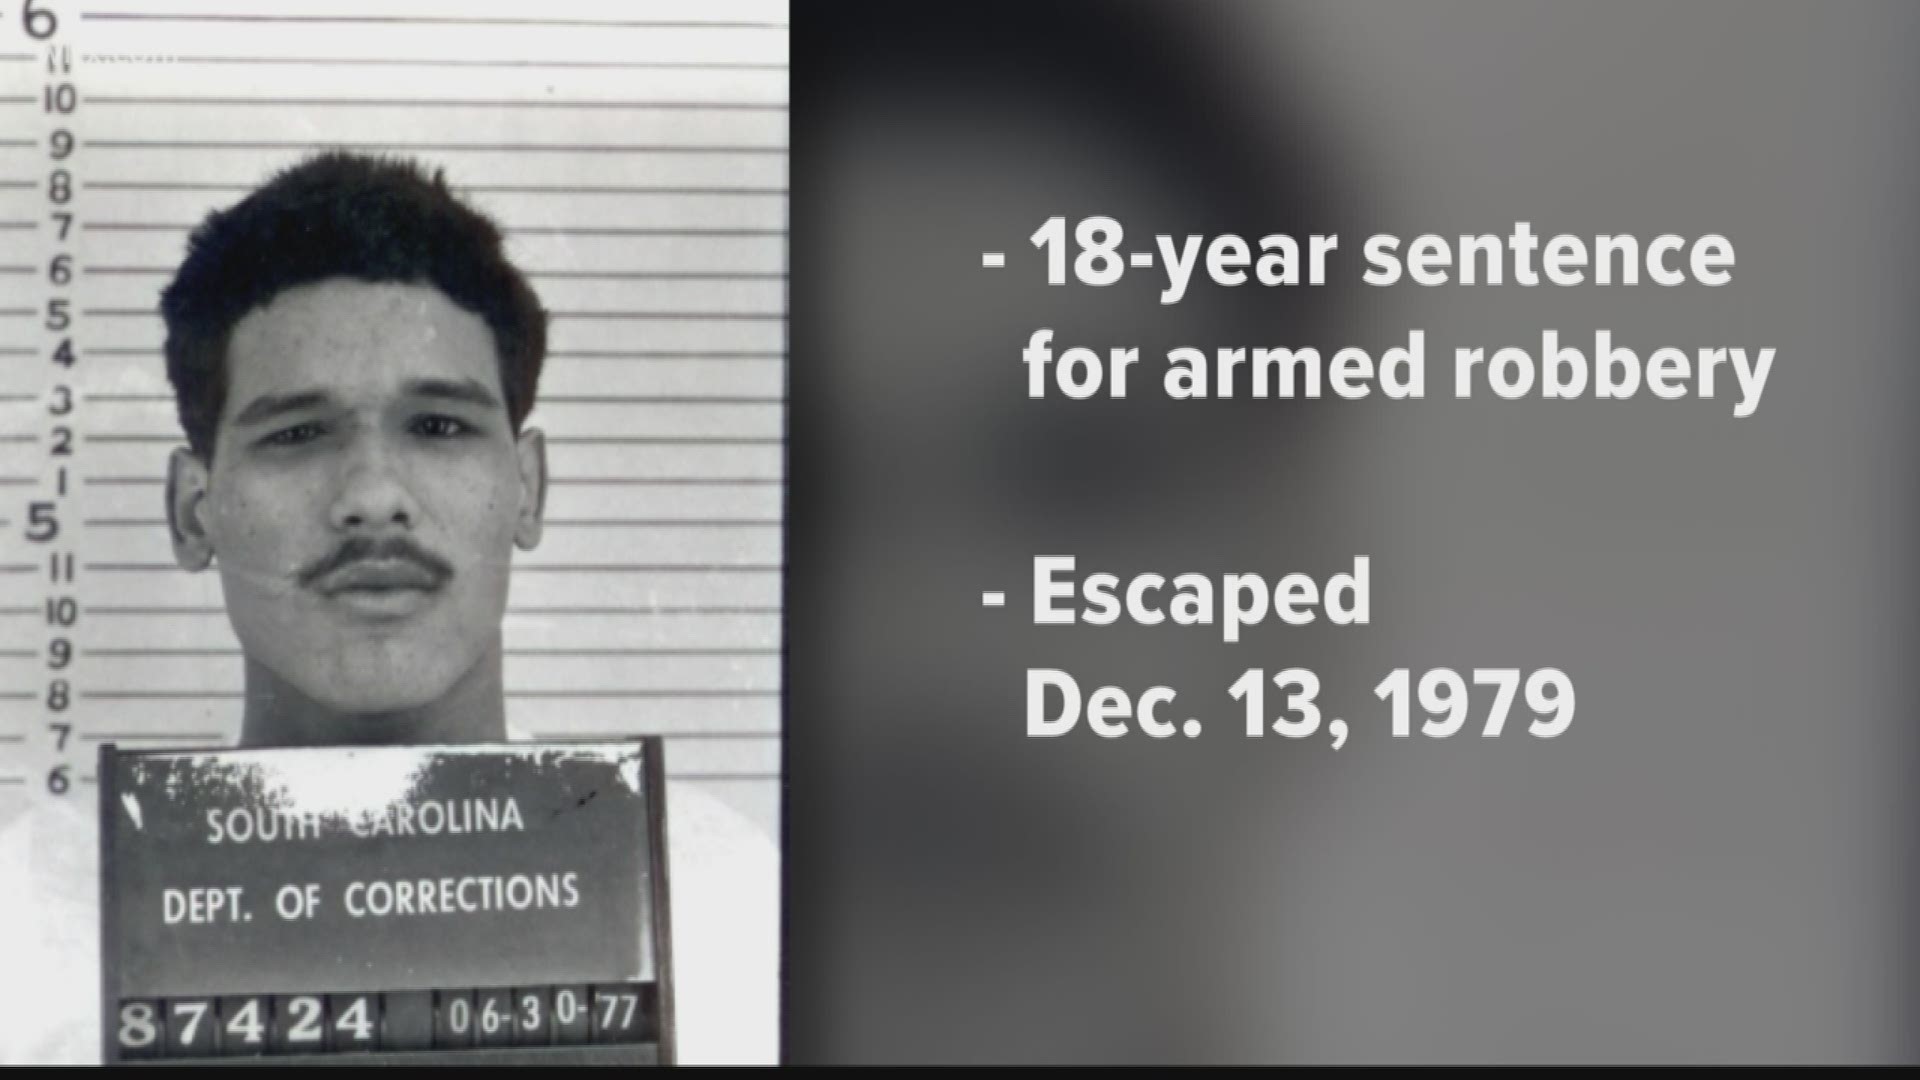 Romero was serving an 18-year sentence for armed robbery from Aiken County when he escaped on Dec. 13, 1979.